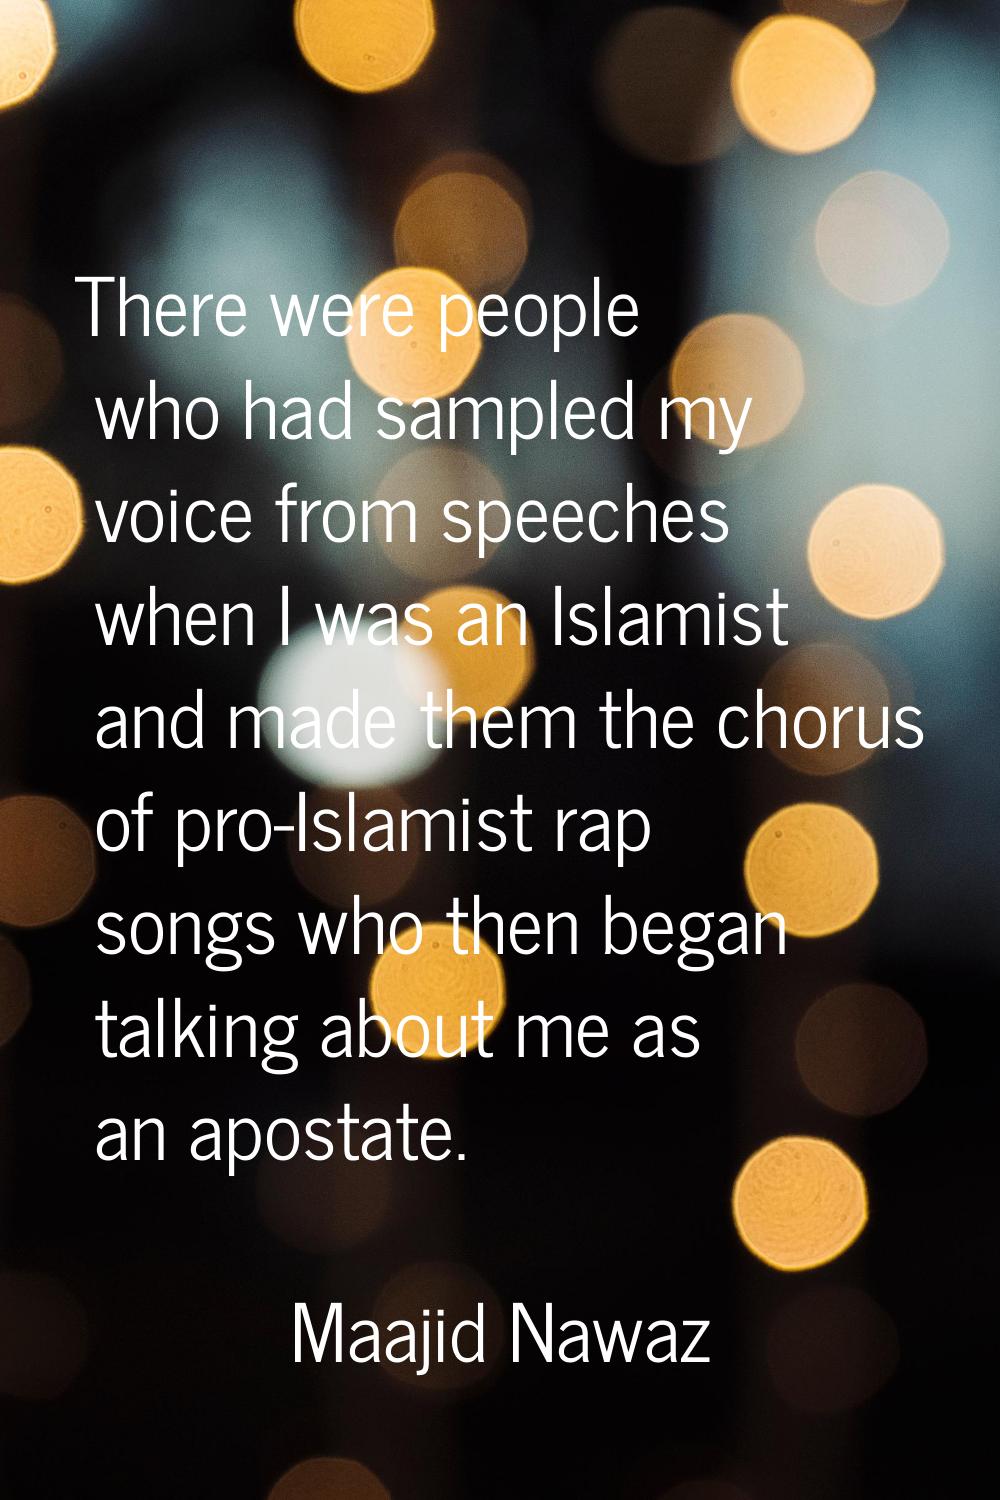 There were people who had sampled my voice from speeches when I was an Islamist and made them the c